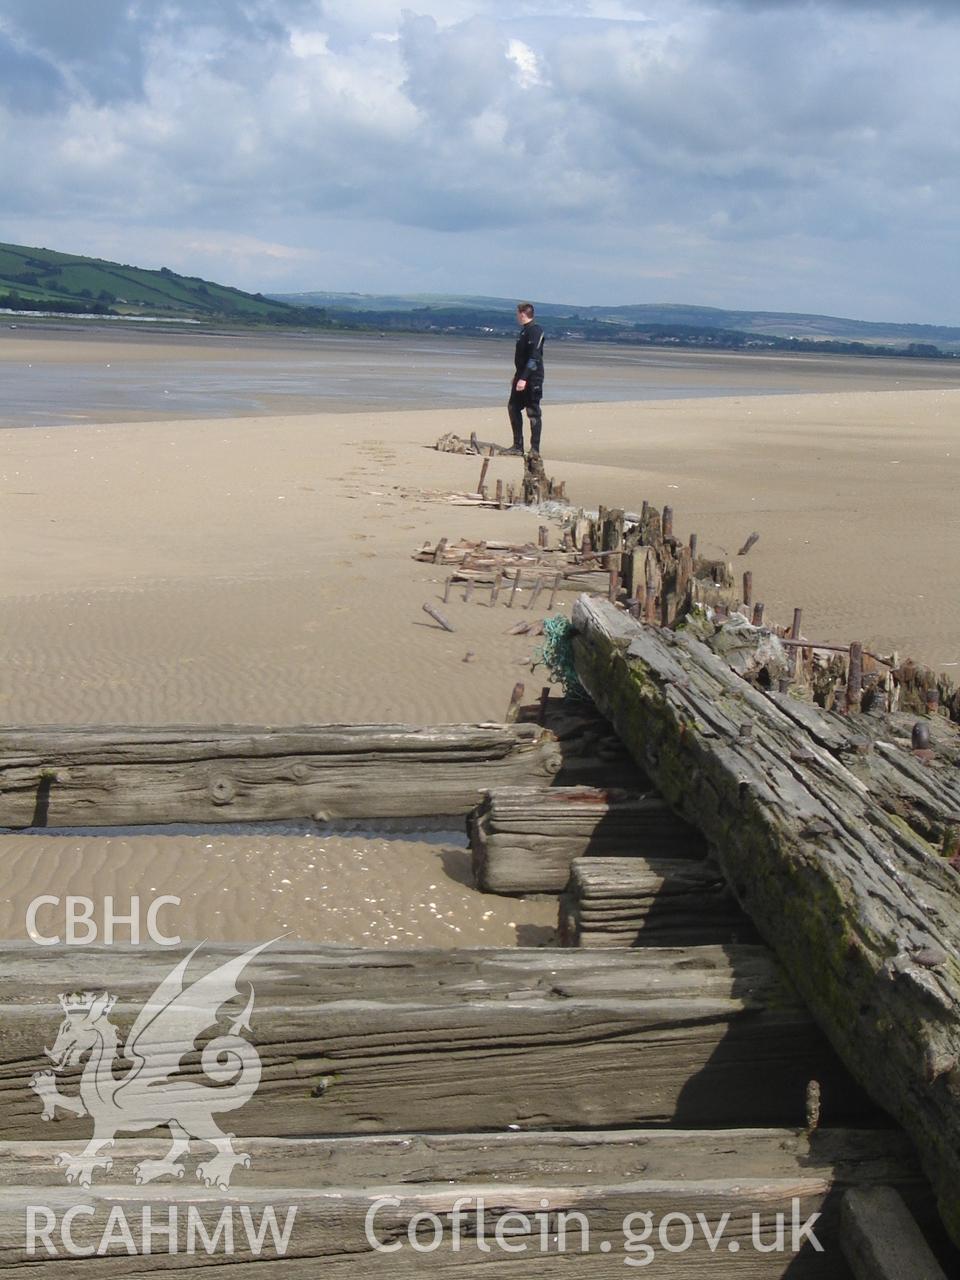 Digital photograph showing the wreck of the Paul at Cefn Sidan, produced by Ian Cundy, August 2012.